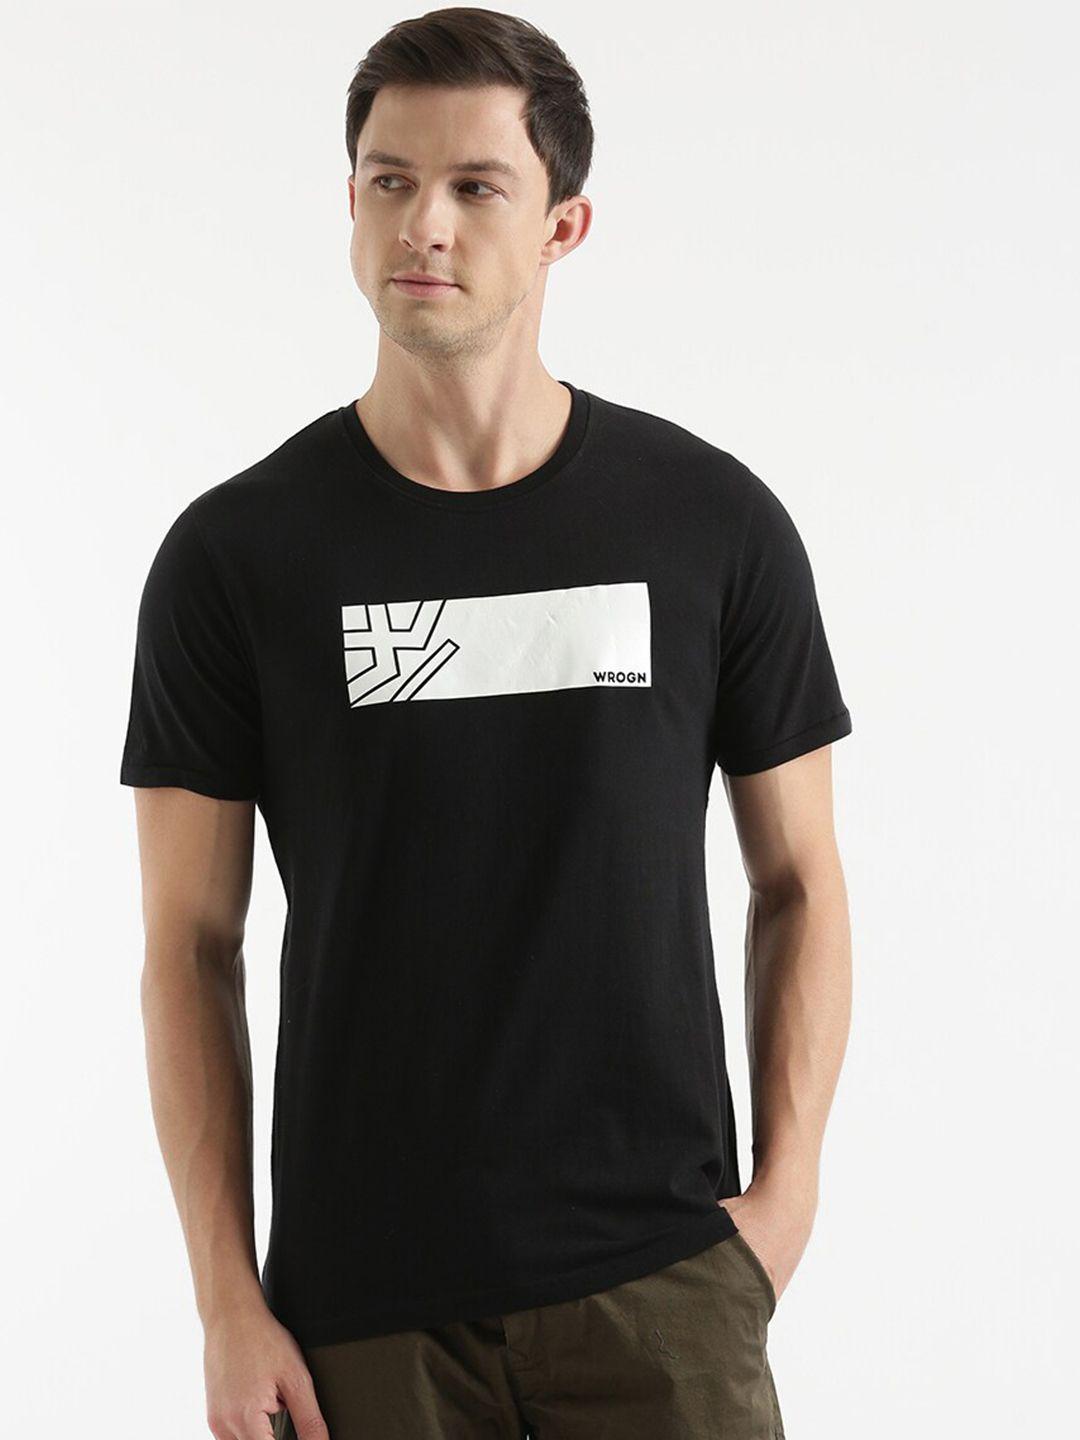 wrogn graphic printed slim fit cotton t-shirt